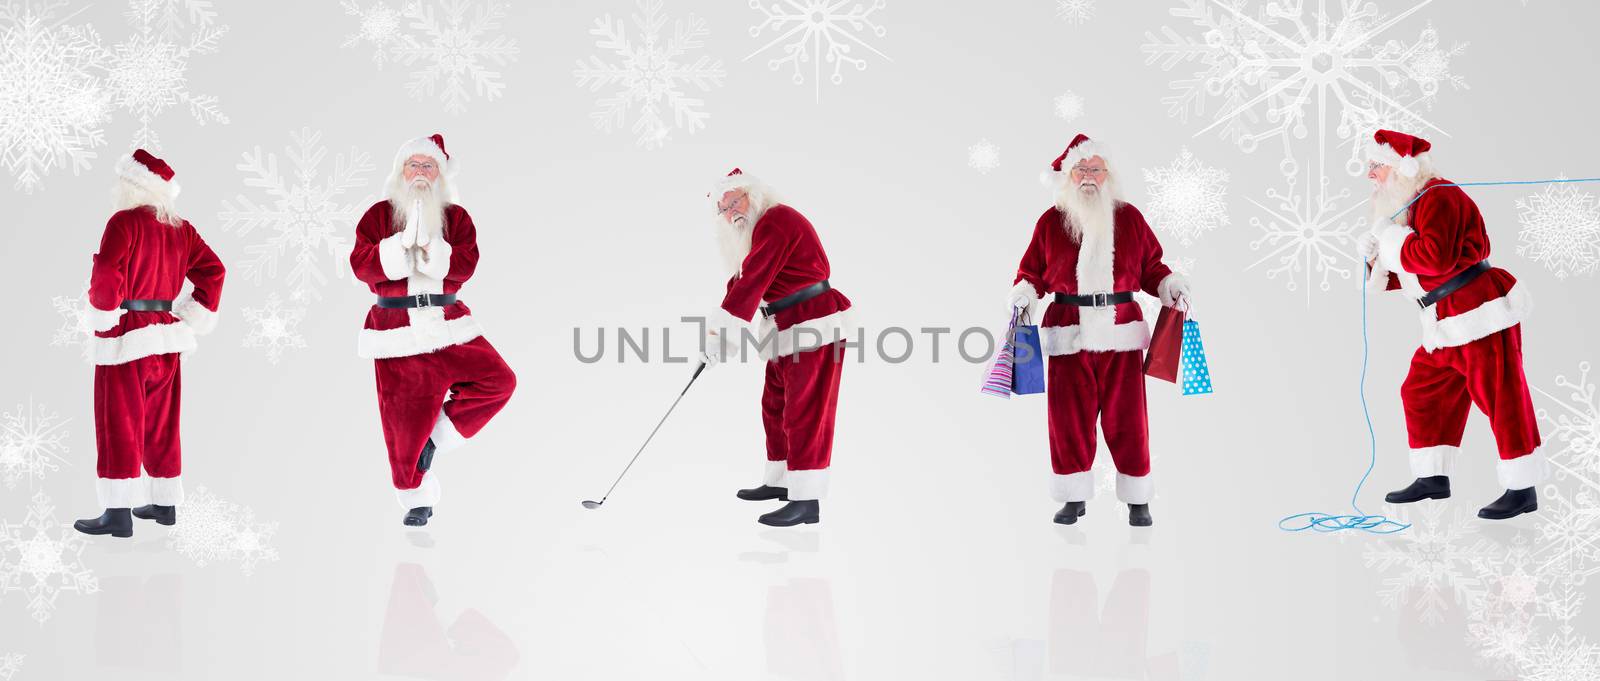 Composite image of different santas against white snowflake design on grey